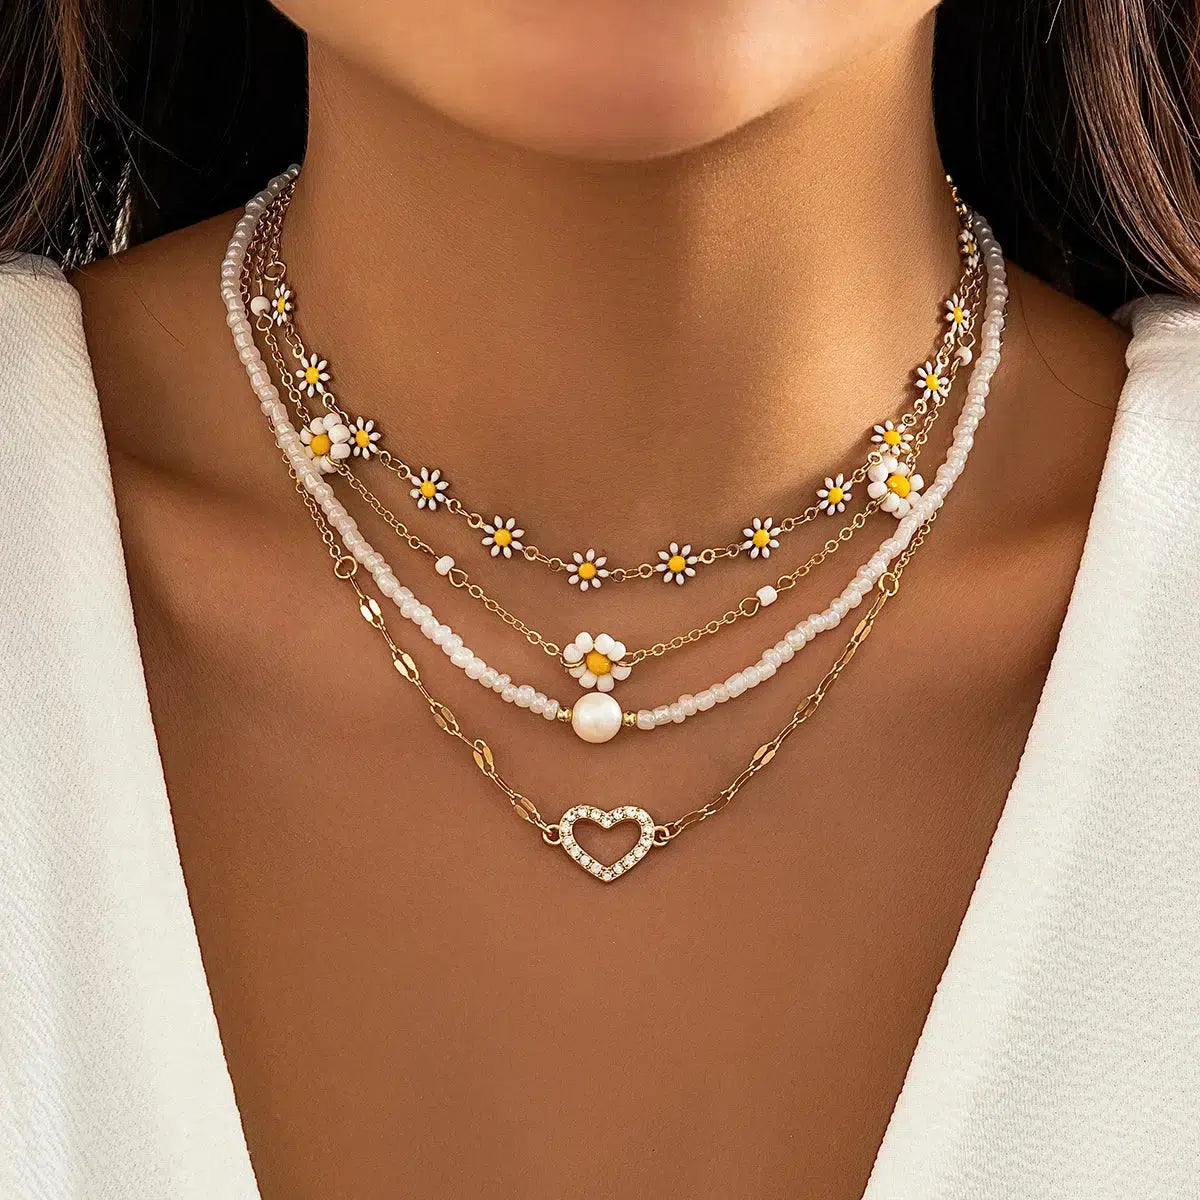 Daisy & Heart Four-Pack Necklace Set